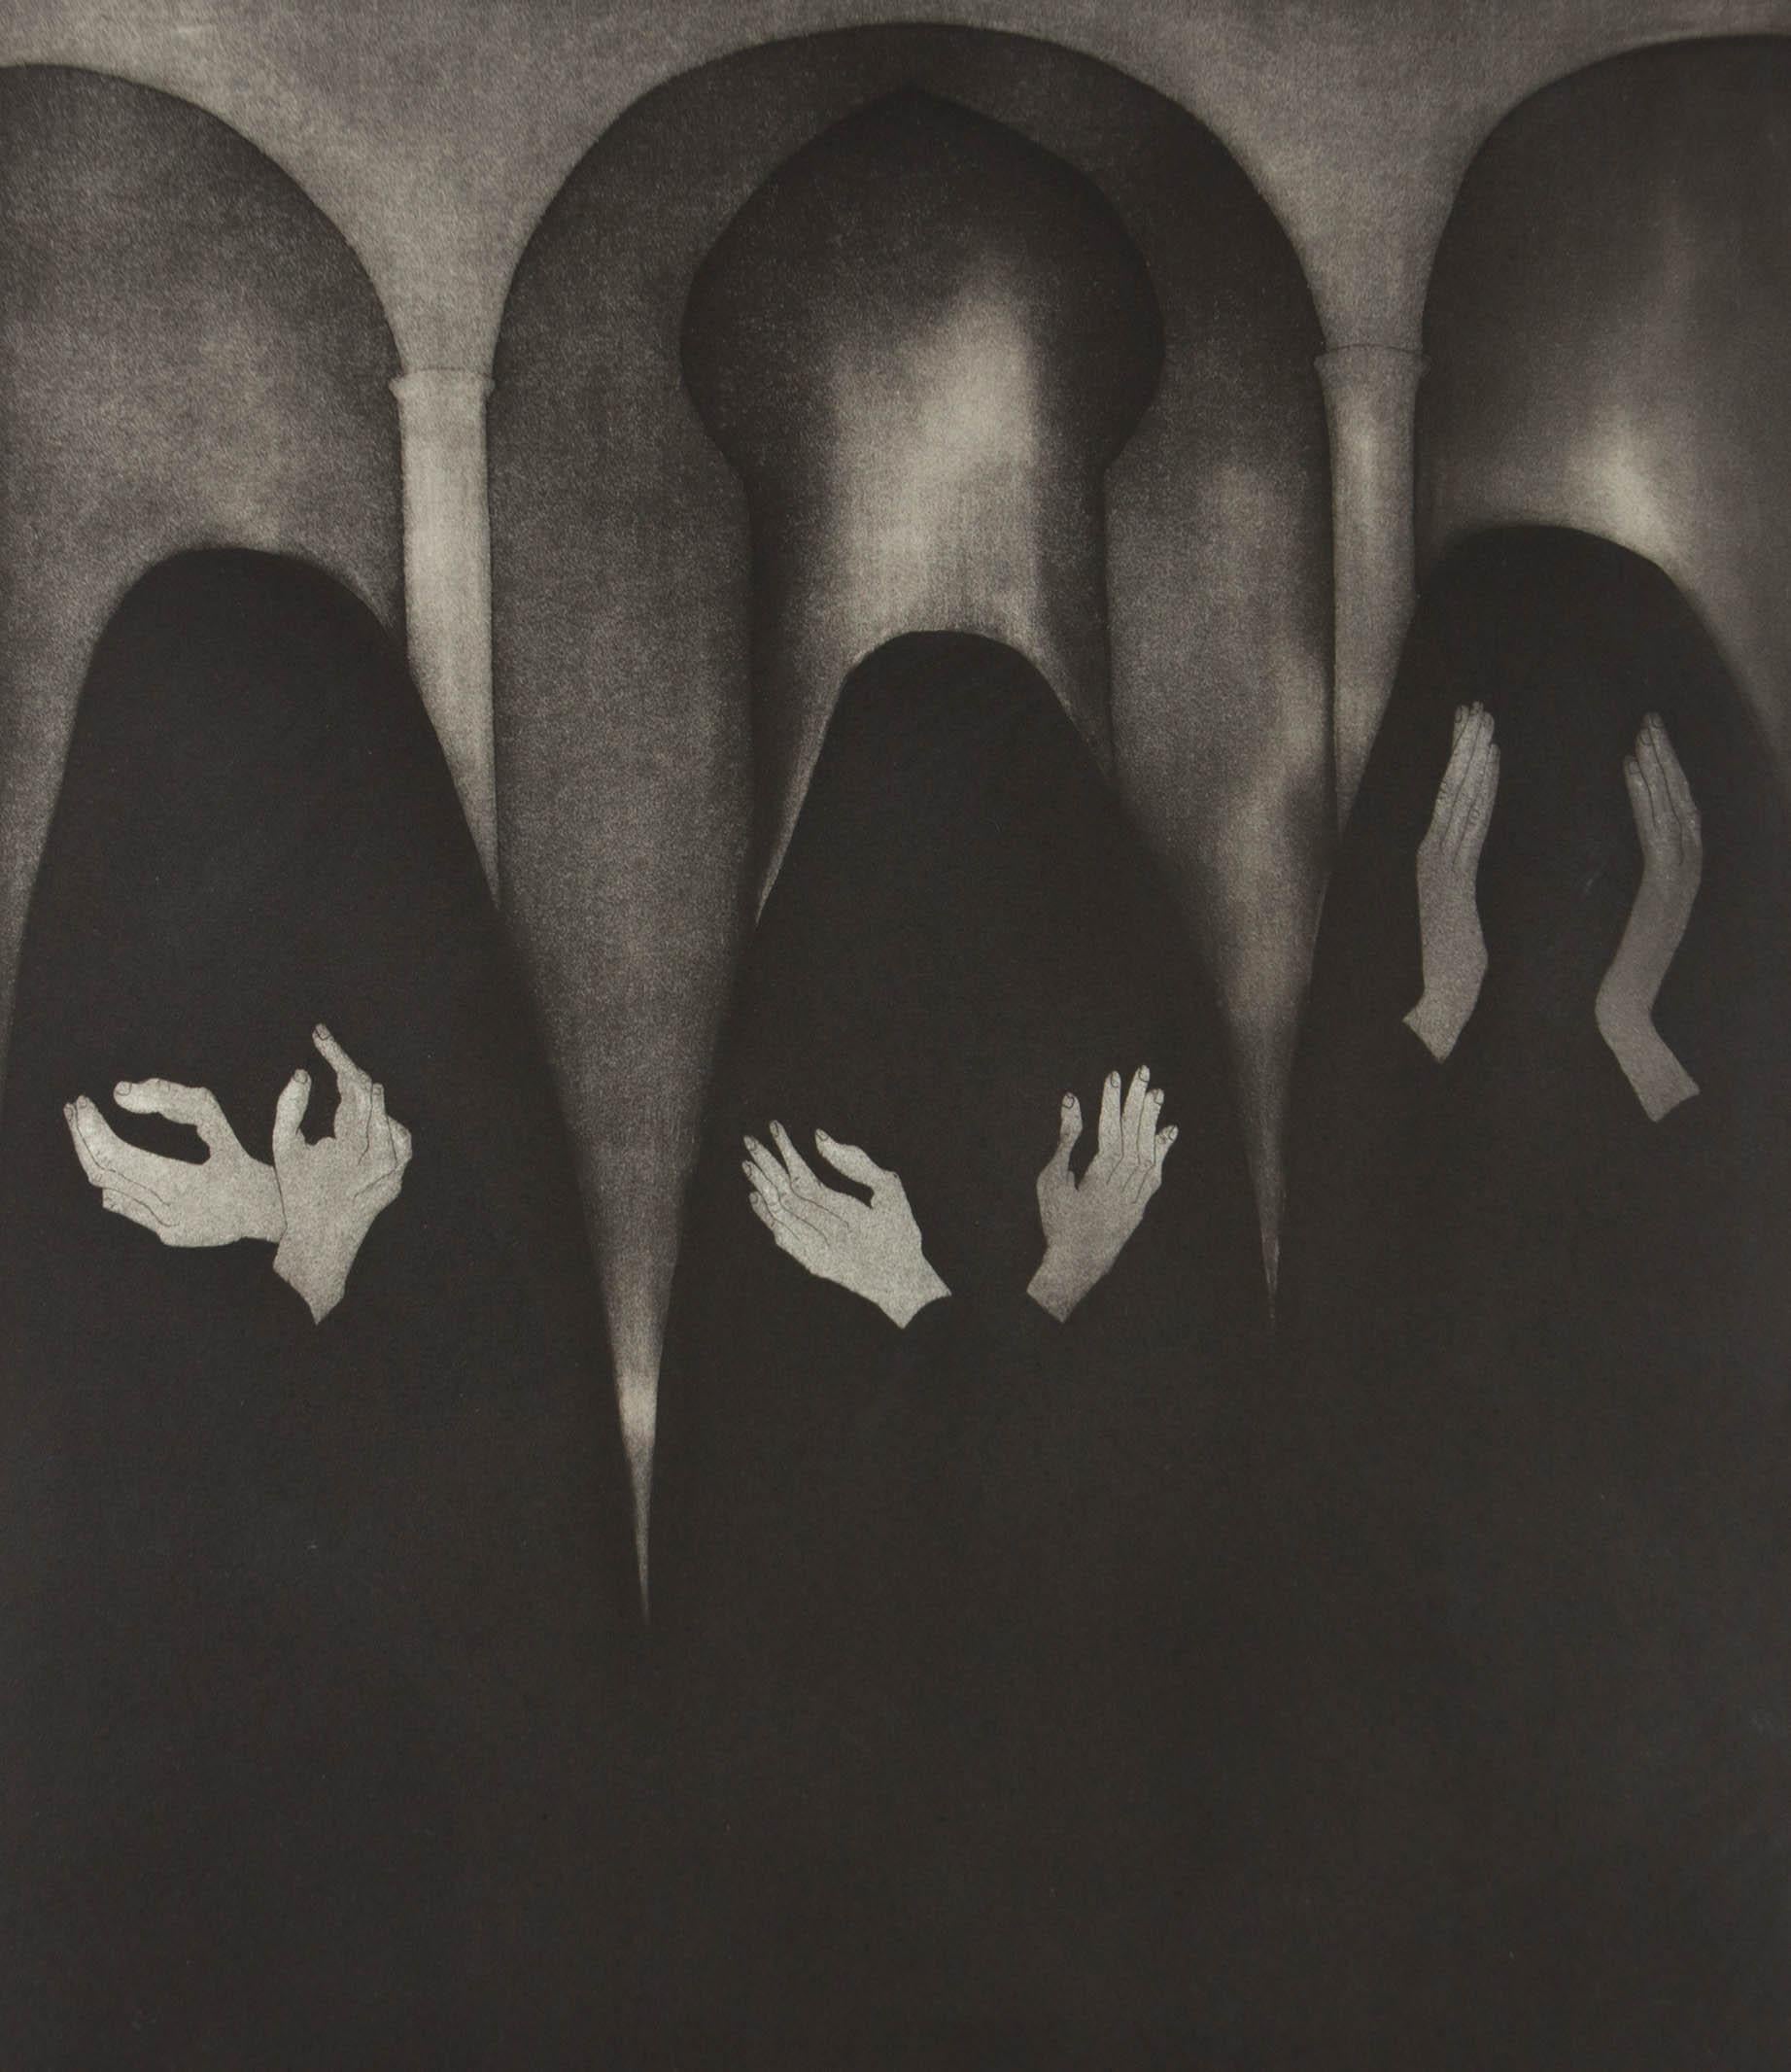 A dark and striking acid etching showing a surreal trio of figures in black shrouds, with only their hands visible, each posed in front of the figure's body. This particular print is from Oliner's 